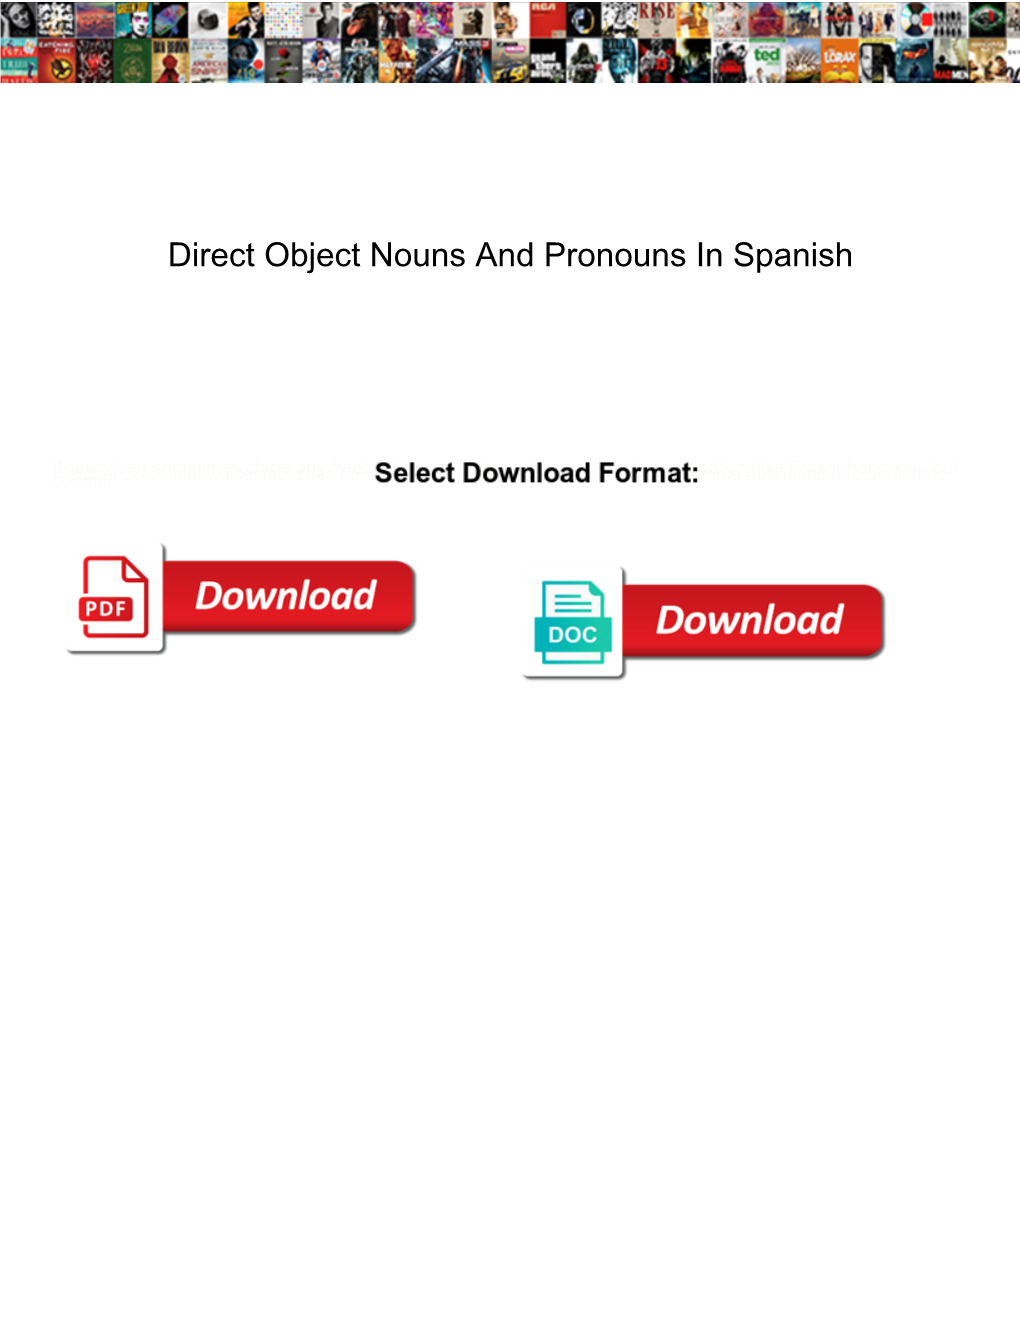 Direct Object Nouns and Pronouns in Spanish